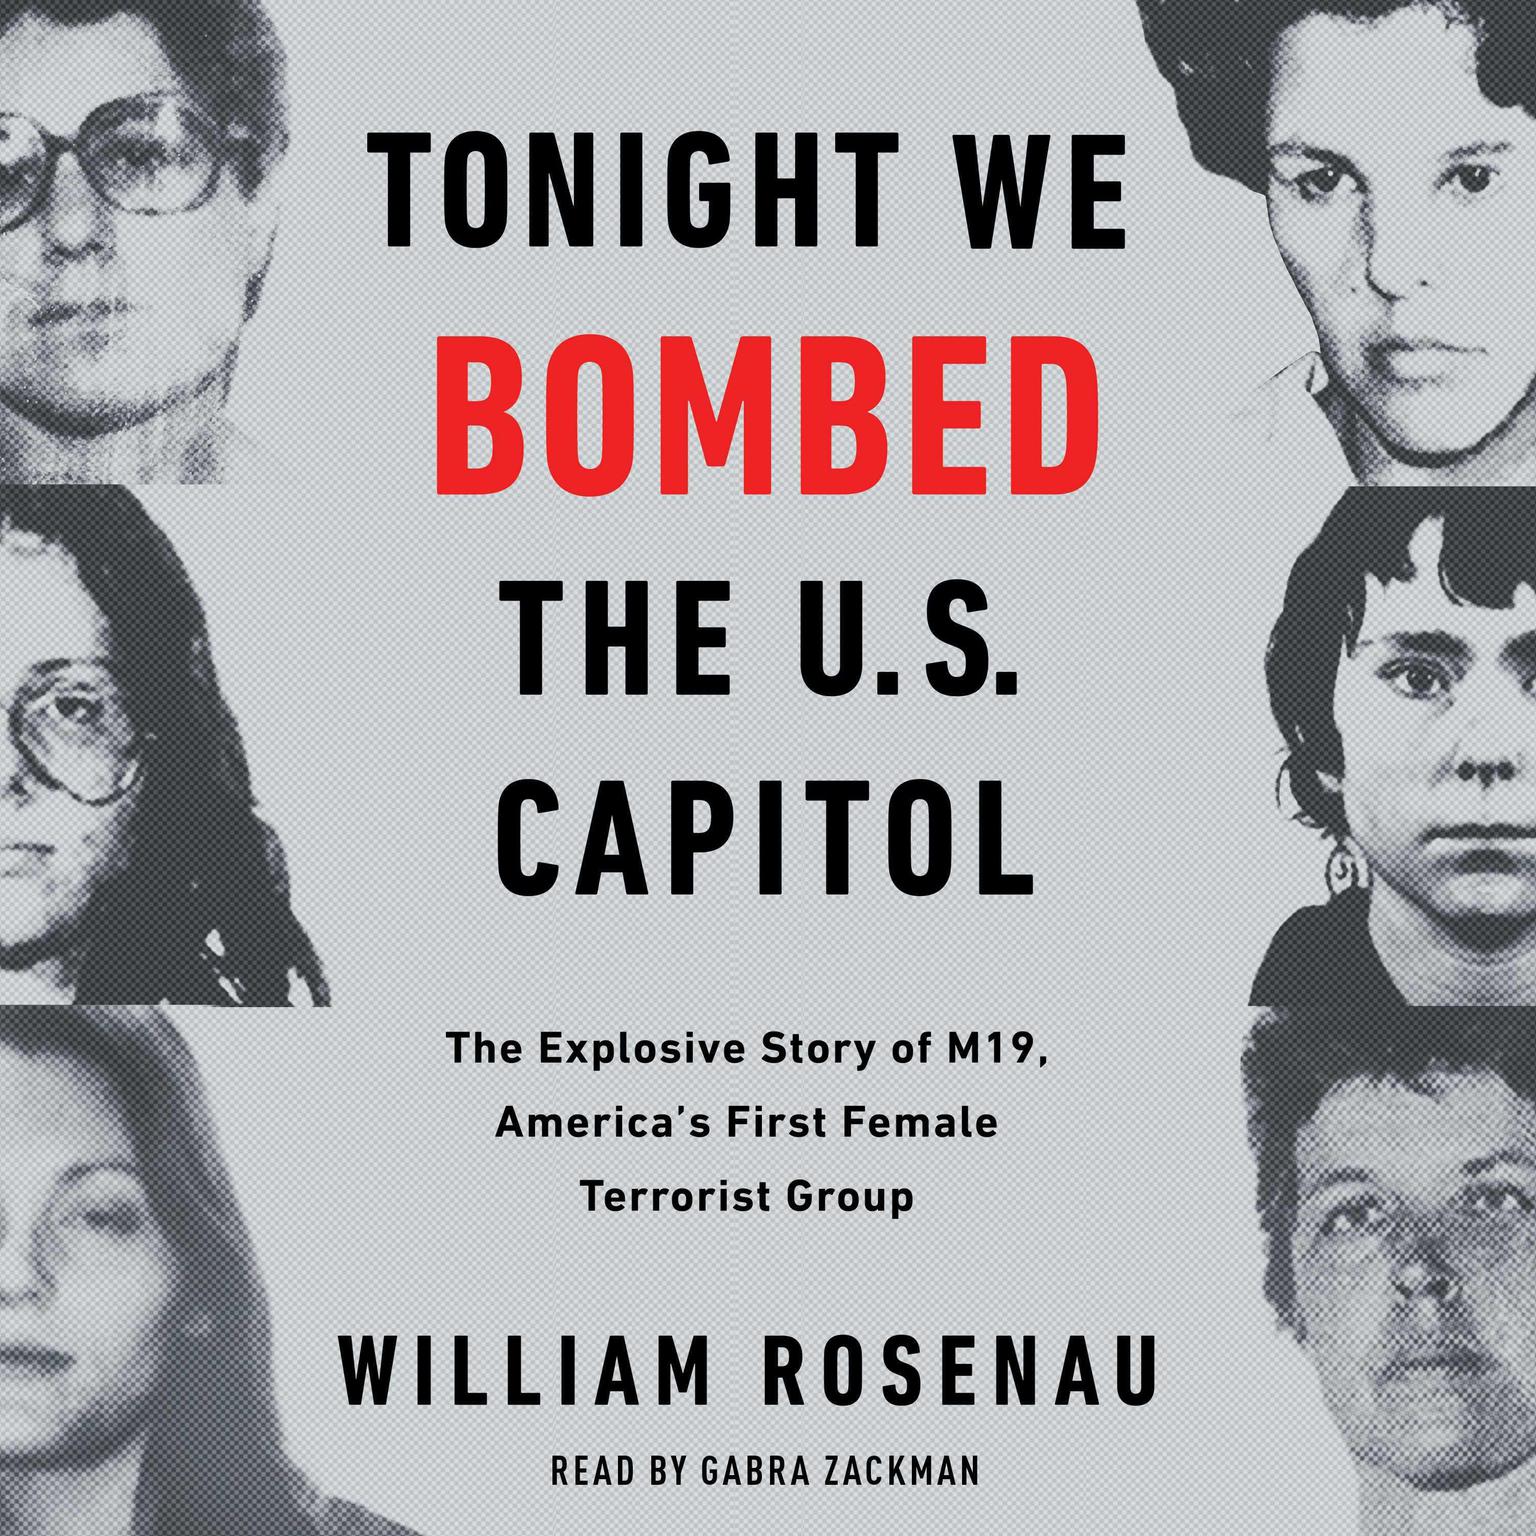 Tonight We Bombed The U.S. Capitol: The Explosive Story of M19, Americas First Female Terrorist Group Audiobook, by William Rosenau